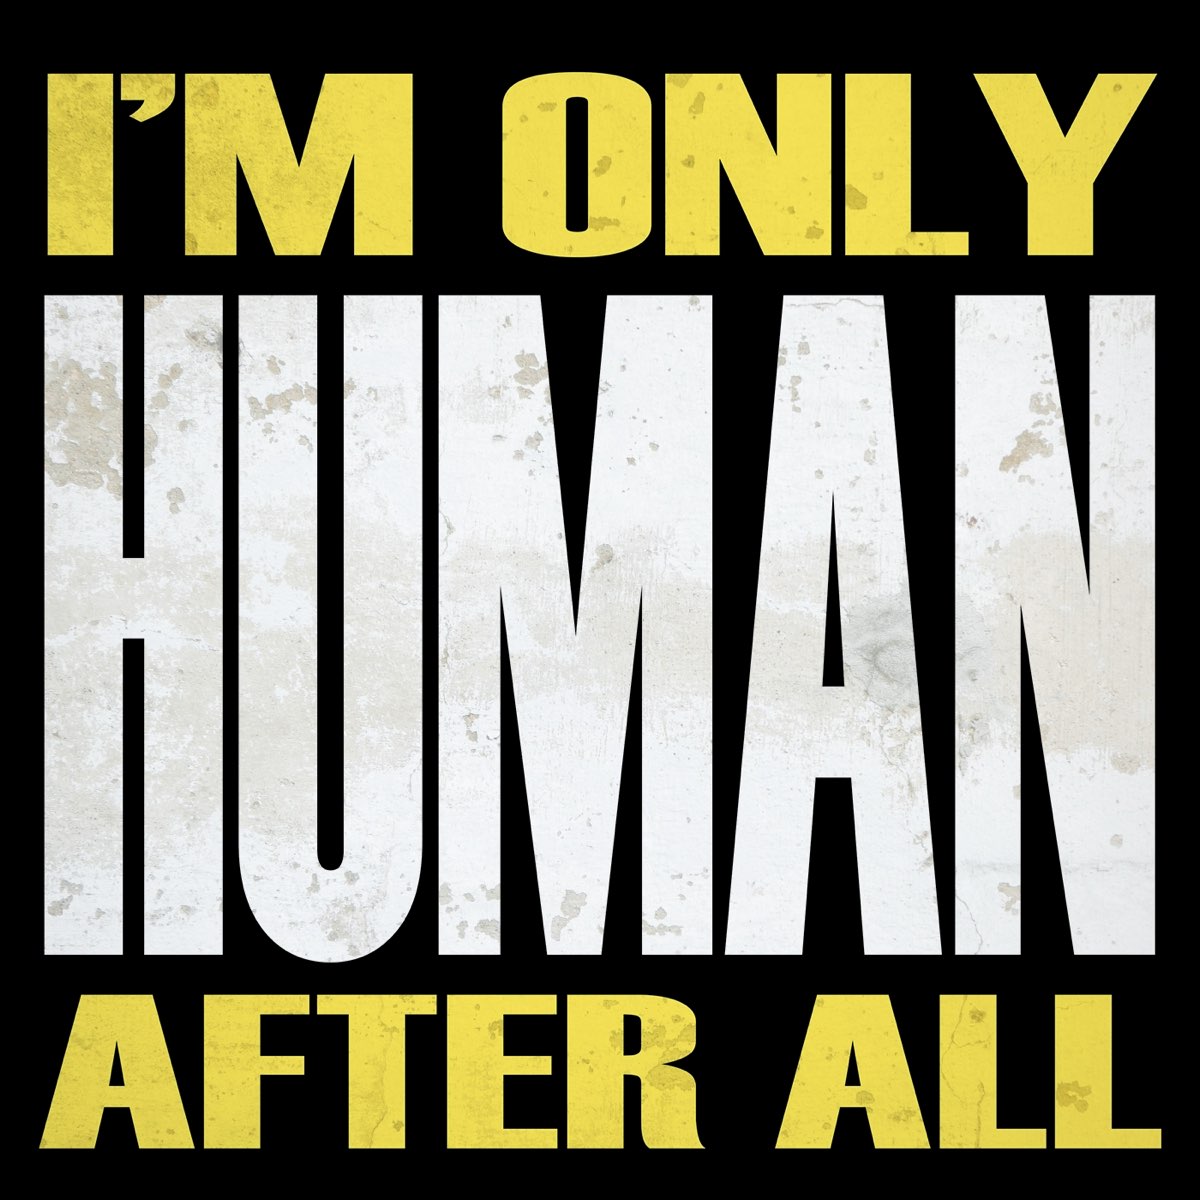 I m only your. Human after all. Im only Human after all. I am a Human after all. I M only Human.